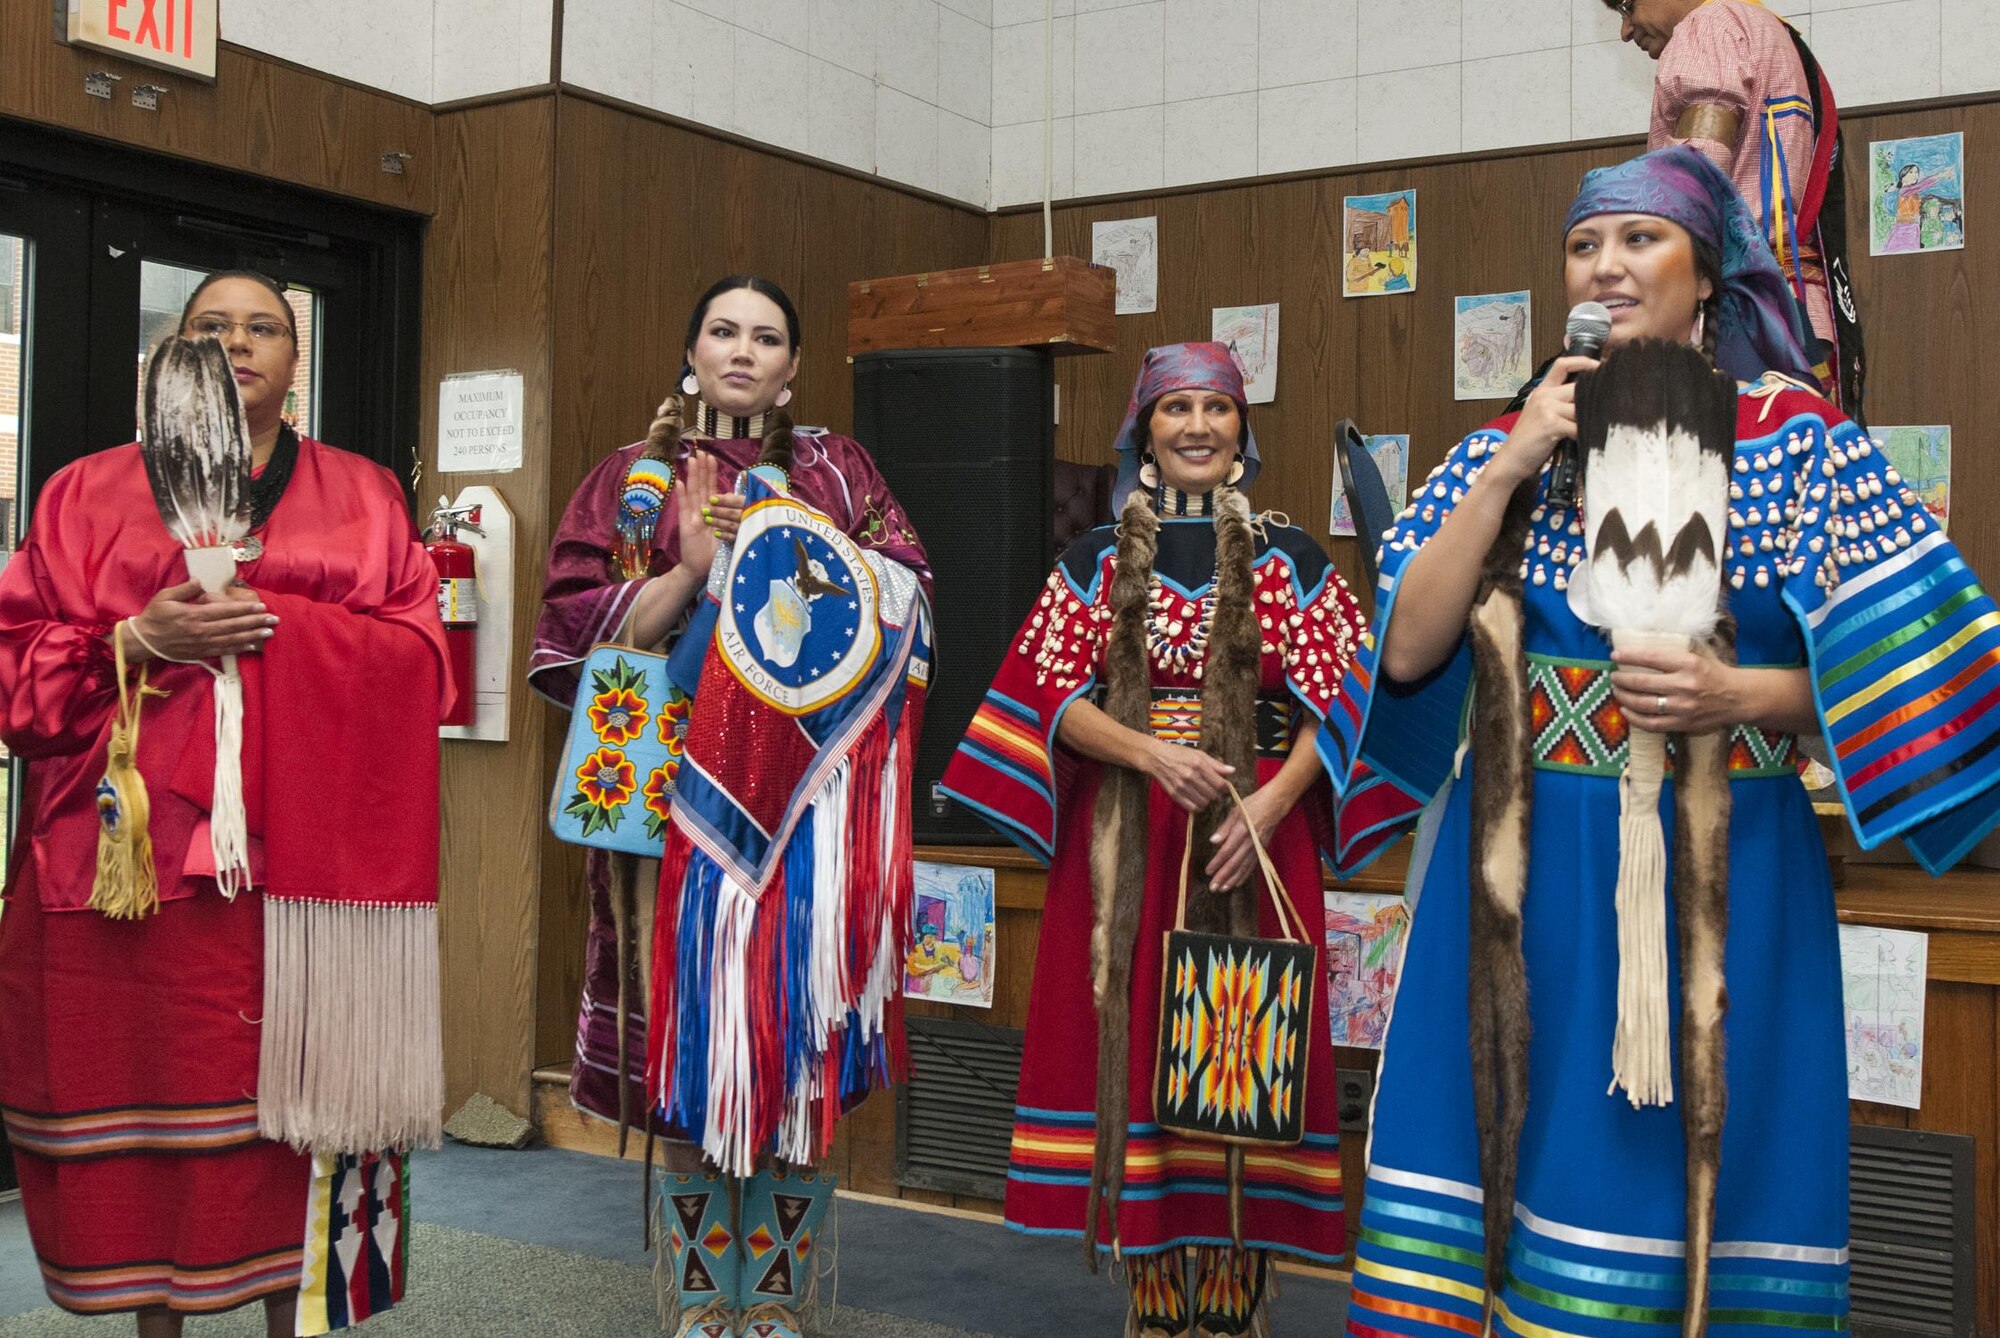 Staff Sgt. Brittinie Alvarez, 811th Security Forces Squadron team leader, gives remarks during the Native American Heritage Month celebration at the 459th Air Refueling Wing auditorium Nov. 30, 2015. This year’s event included traditional food tasting, books, beadwork, weaponry, music and dancing from various Native American tribes. (U.S. Air Force photo by Staff Sgt. Kat Justen) 
